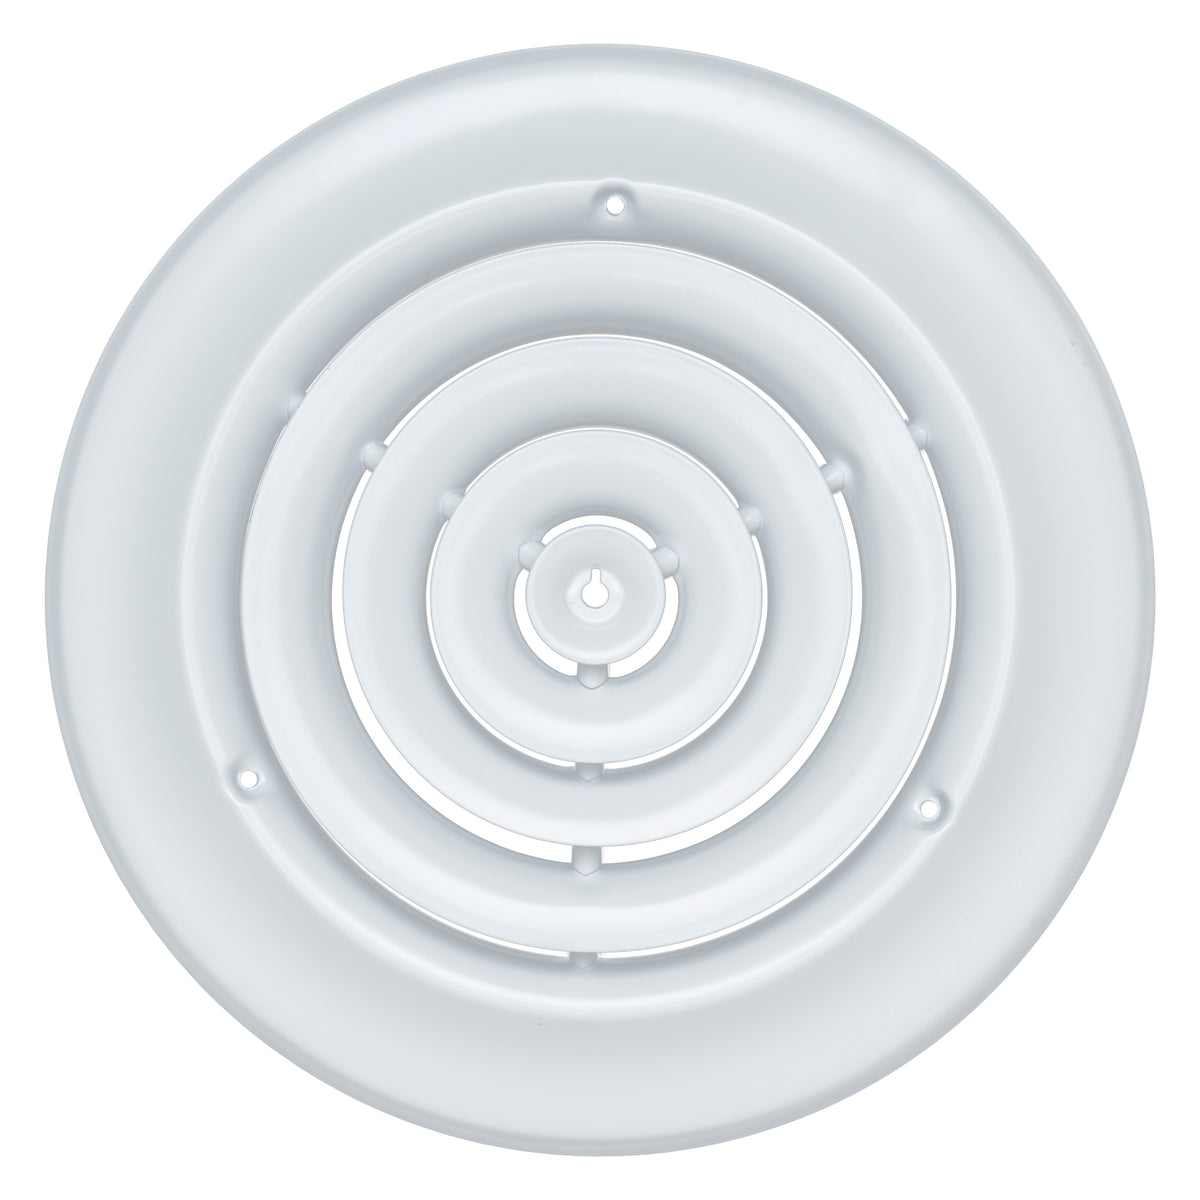 Handua 8" Steel Round Air Supply Diffuser for Ceiling - White - Outer Dimension: 11-15/16"